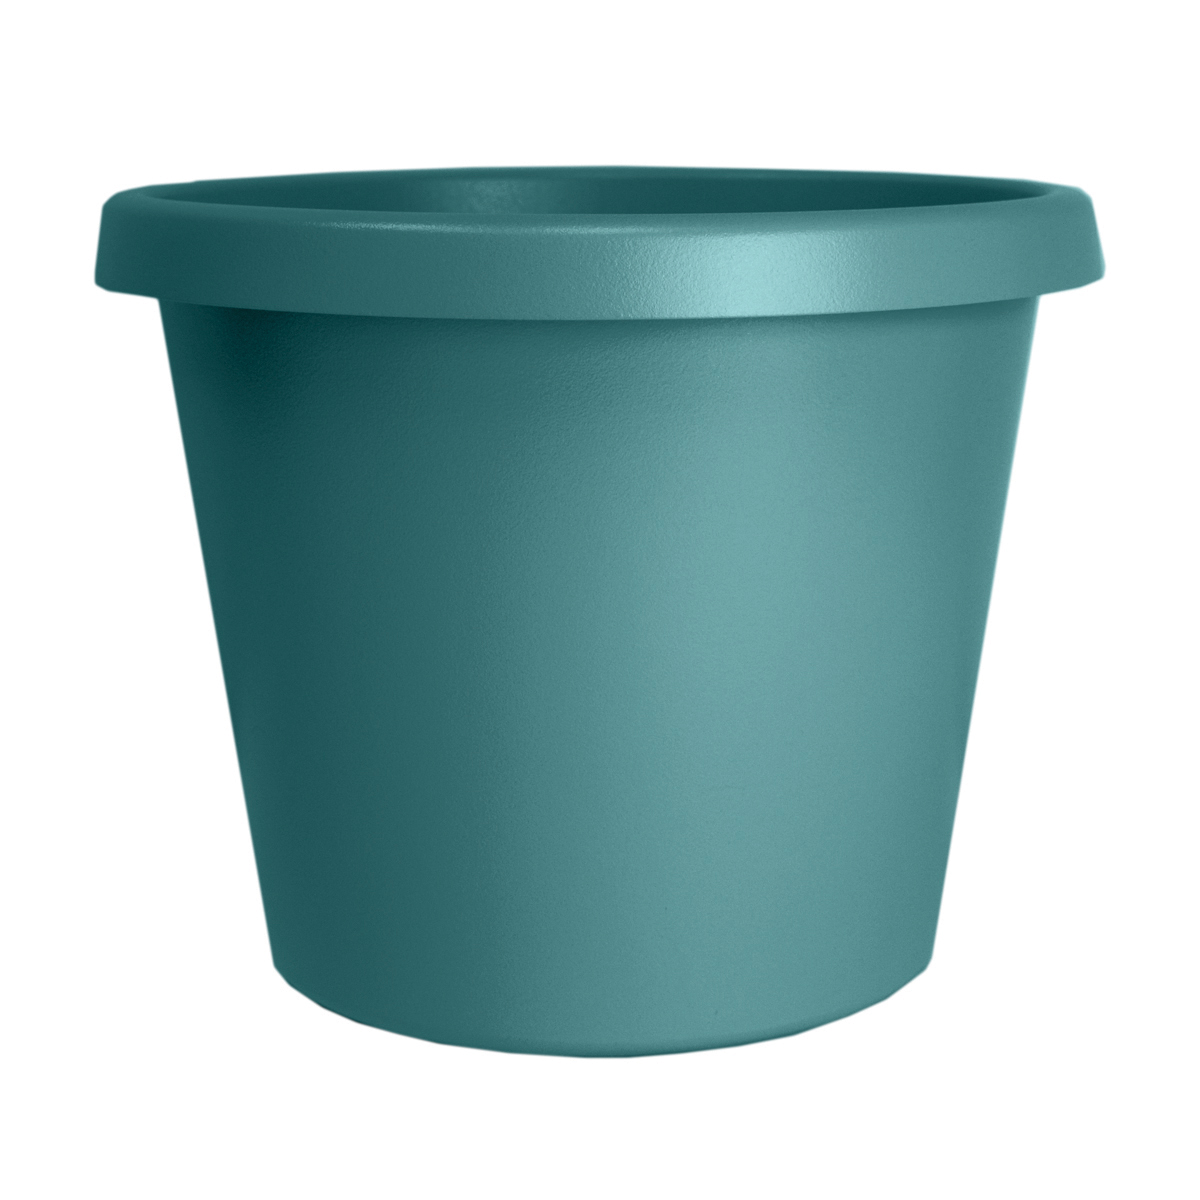 Picture of 14" Prima Planter in Dusty Teal